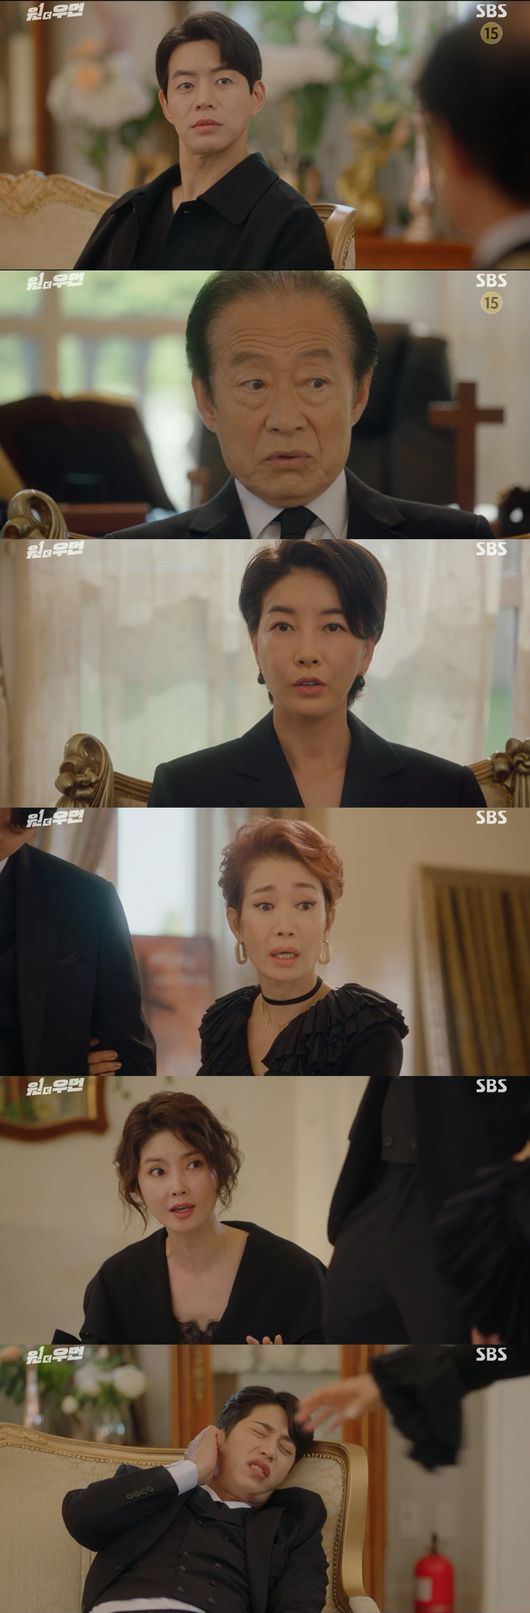 The genes of Lee Ha-nui and Kang Jang-su were matched.In the SBS gilt drama Wonder Woman broadcast on the 23rd, Kang Eun-hwa (Hwang Young-hee) announced the results of genetic tests of Chairman Kang Jang-soo and supporting actor Lee Ha-nui, and the two were identified as paternals.On this day, supporting actor and Han seung-wook began to investigate the arson incident at the Hanju factory and found out that there was a han yeong-sik (Jeon Gook-hwan) behind the arson incident and the death of Han seung-wook father.Han Sung-uns memorial service included a han Seung-wook.Han seung-wook asked Han young-sik where he was on the day his father died, when he was in the arson.After Han Seung-wook left, Han Sung-hye (Jin Seo-yeon) told his family, Everyone was playing with a woman who thought it was Olk.Kang Eun-hwa said at the shareholders meeting, I will disclose the details of the confirmation of the paternity of Yuko Fueki Group Chairman Kang Min-a and Kang Min-a, saying, There is a Chirashi that the chairman is fake.Kang Eun-hwa said, I changed the test paper later, but I will open it here because there may be a story about it.Kang Eun-hwa showed embarrassment by revealing the results of the test.Kang Eun-hwa surprised the surroundings by announcing that biologically, the pattern relationship is estimated at 99.999%.Kang Jang-su, chairman of the team, and co-stars are actually actually related. Cho Yeon-ju got up in a surprise and started laughing at me.Meanwhile, in the epilogue on the same day, Cho Yeon-ju reacquainted with Grandmas Boy through hypnosis, with her supporting actor previously blaming herself for Grandmas Boys death.Grandmas Boy is going to die now, you cant go, said Cho, grabbing Grandmas Boy. Grandmas Boy is dying because of me.But Grandmas Boy said: Why are you dying because of you, your temper resembles me, do you think I wont go if you dont go?Cho Yeon-ju said, Now I go and Grandmas Boy will blame me for my whole life for being dead because of me.But Grandmas Boy said, Everything in this world is not because of anyone, but because of me.Grandmas Boy is due to Grandmas Boy, and my father is due to my father. The fire is due to the person who burned it, and the traffic accident is due to the person who caused the traffic accident.Just think about you and live well, he said.Cho Yeon-ju wept and said, Grandmas Boy I live well. Im a prosecutor. And the fire at the factory isnt even from my father.Grandmas Boy said, My dog has made a career. See, your father is so upset that he is not the one to fire.Ill make sure I tell Grandmas Boy who did it, and Ill take off my fathers falsity, so dont worry, you can go, the supporting actor said.Cho Yeon-ju, seeing Grandmas Boys shabby shoes, took off his own and said, Put this on.Grandmas Boy turned around after receiving the supporting actors shoes.Cho Yeon-ju wept at the back of Grandmas Boy and shook hands for a long time.